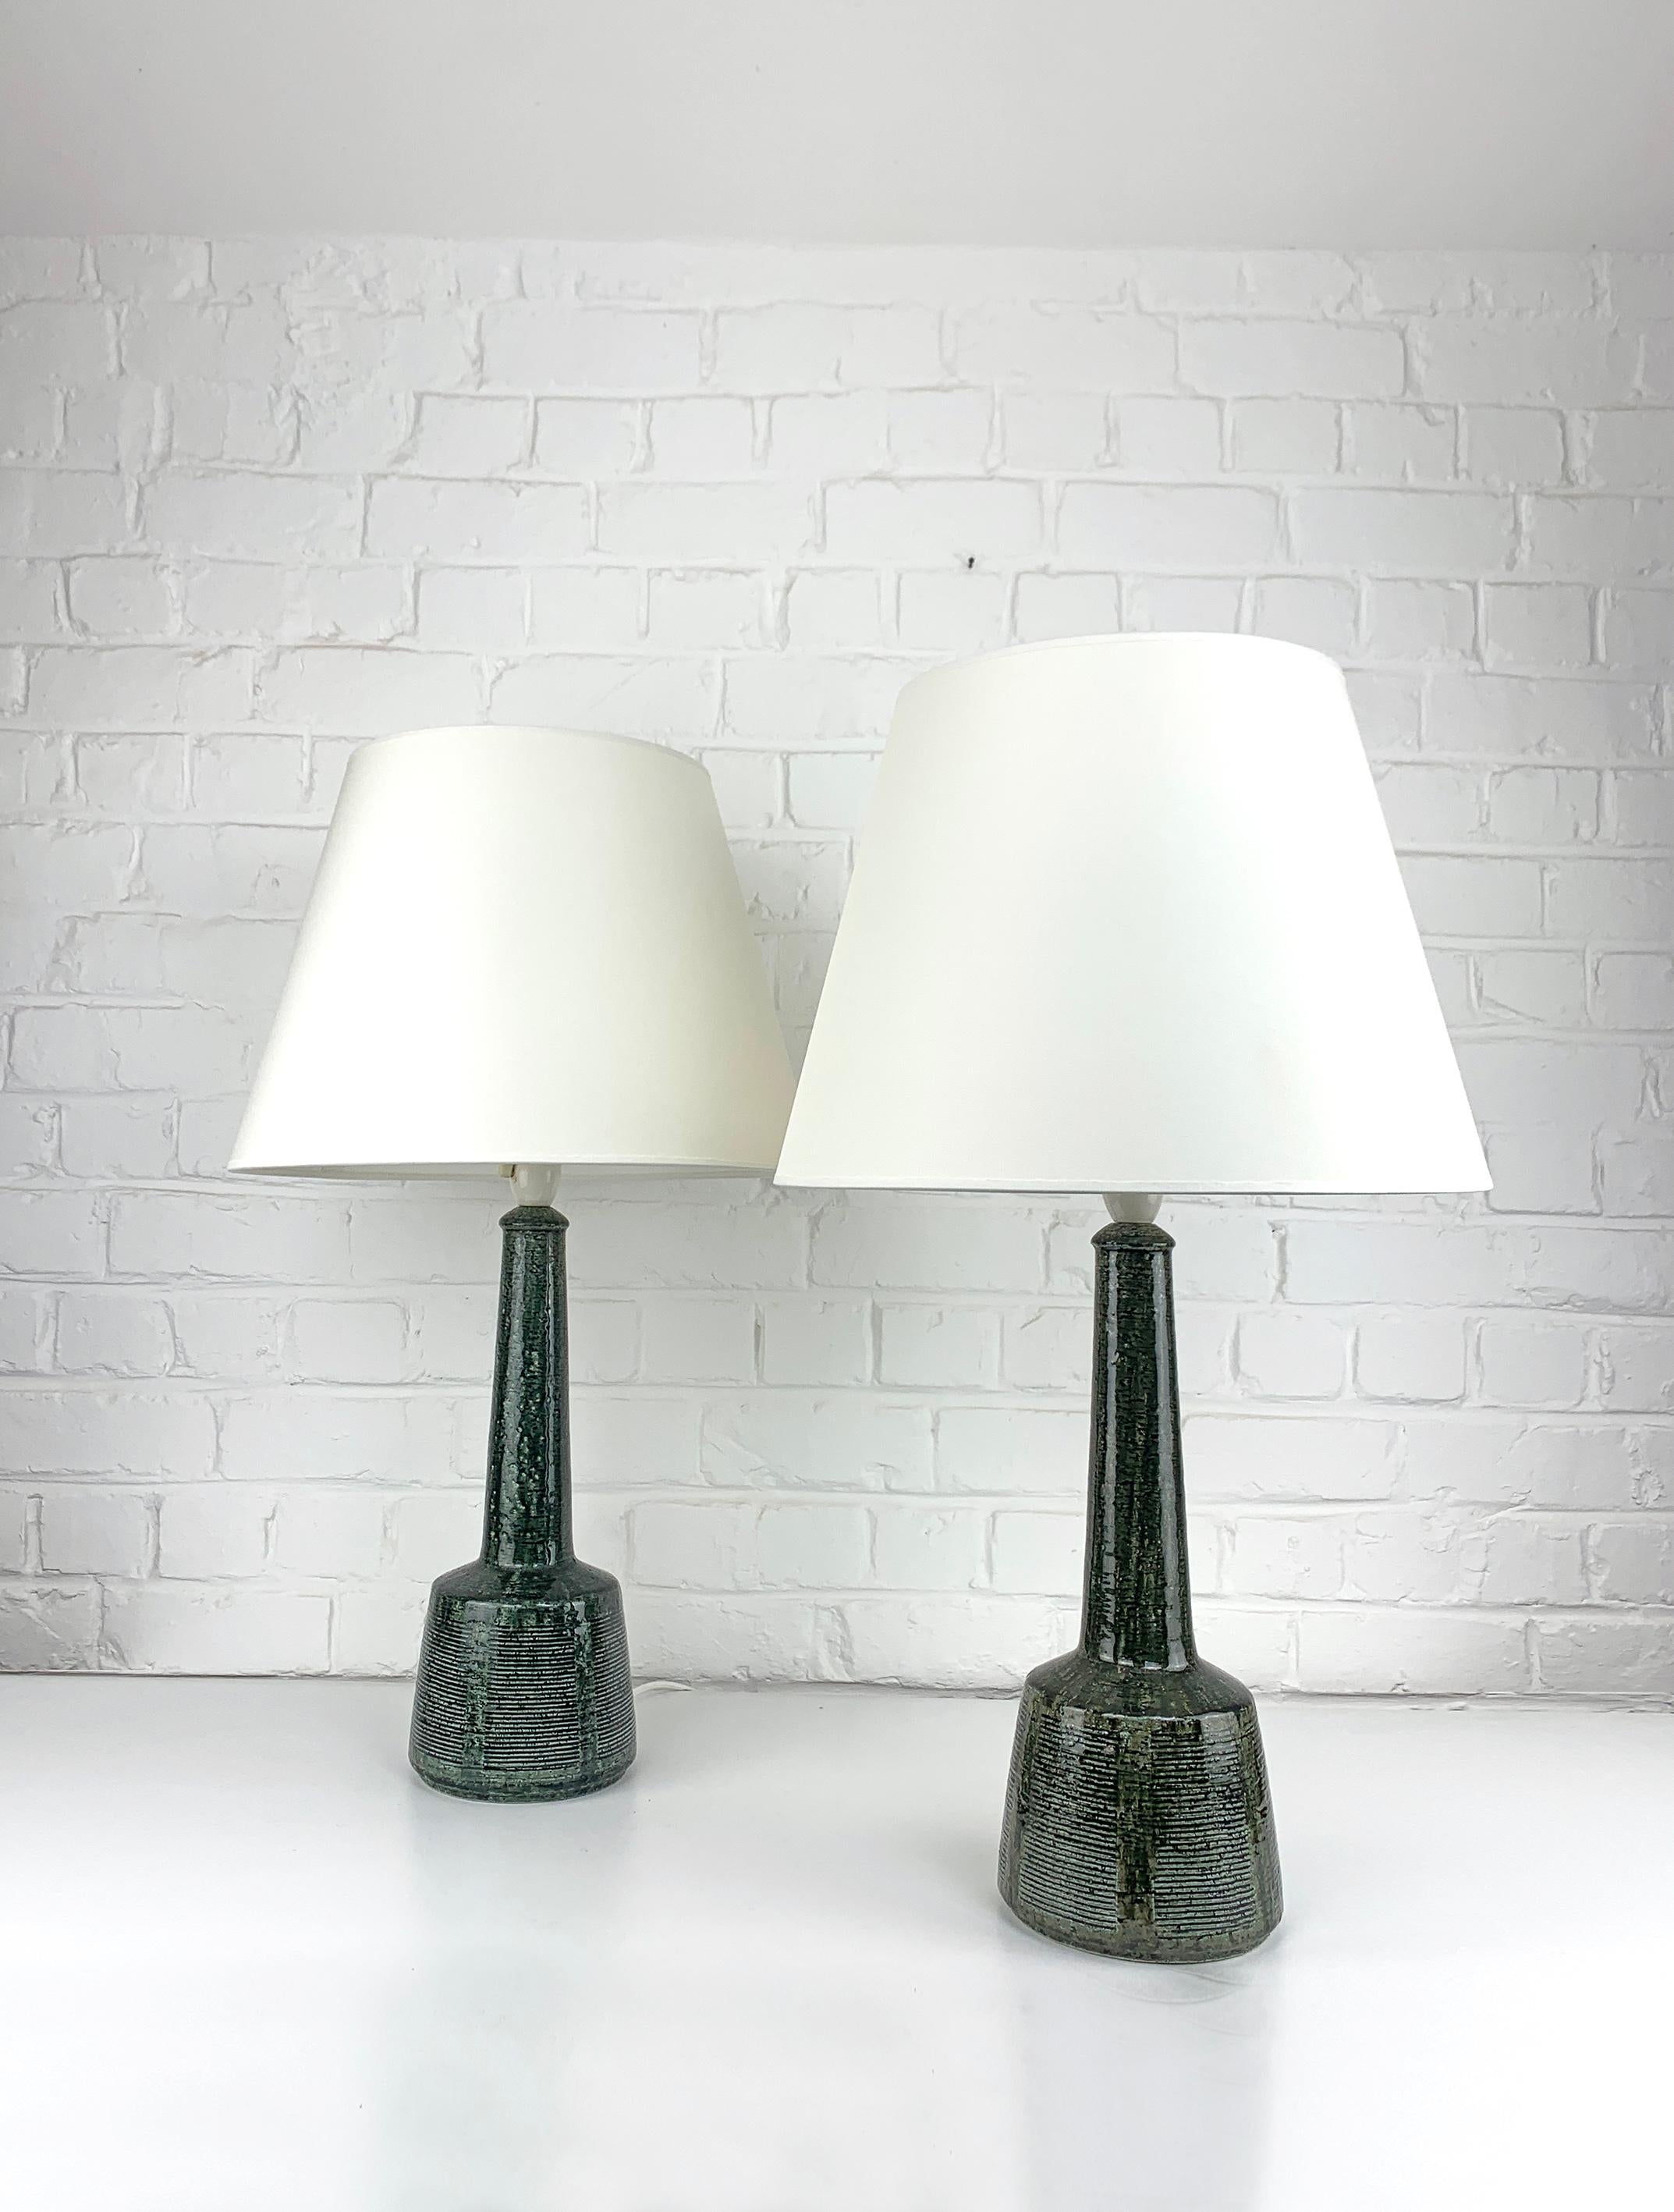 These lamps have been designed by Esben Klint, the son of Kaare Klint (the famous danish furniture designer). Esben has created a timeless design with this model, it has a contemporary and graphic side despite being over 50 years old.

These lamps